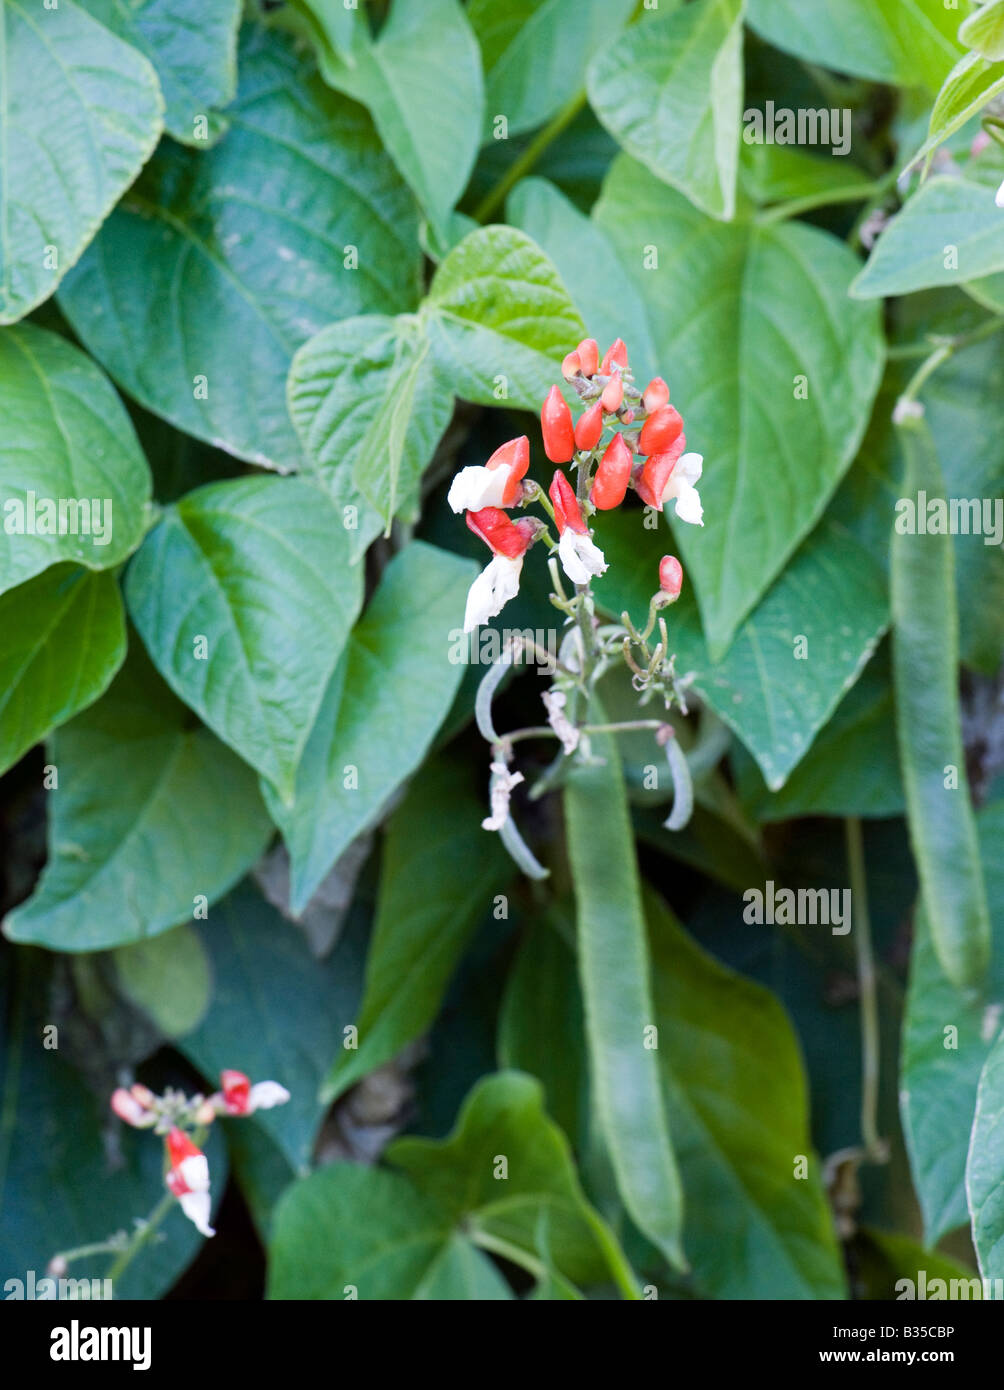 Scarlet Runner bean plant with red and white flowers growing in an English country garden Stock Photo